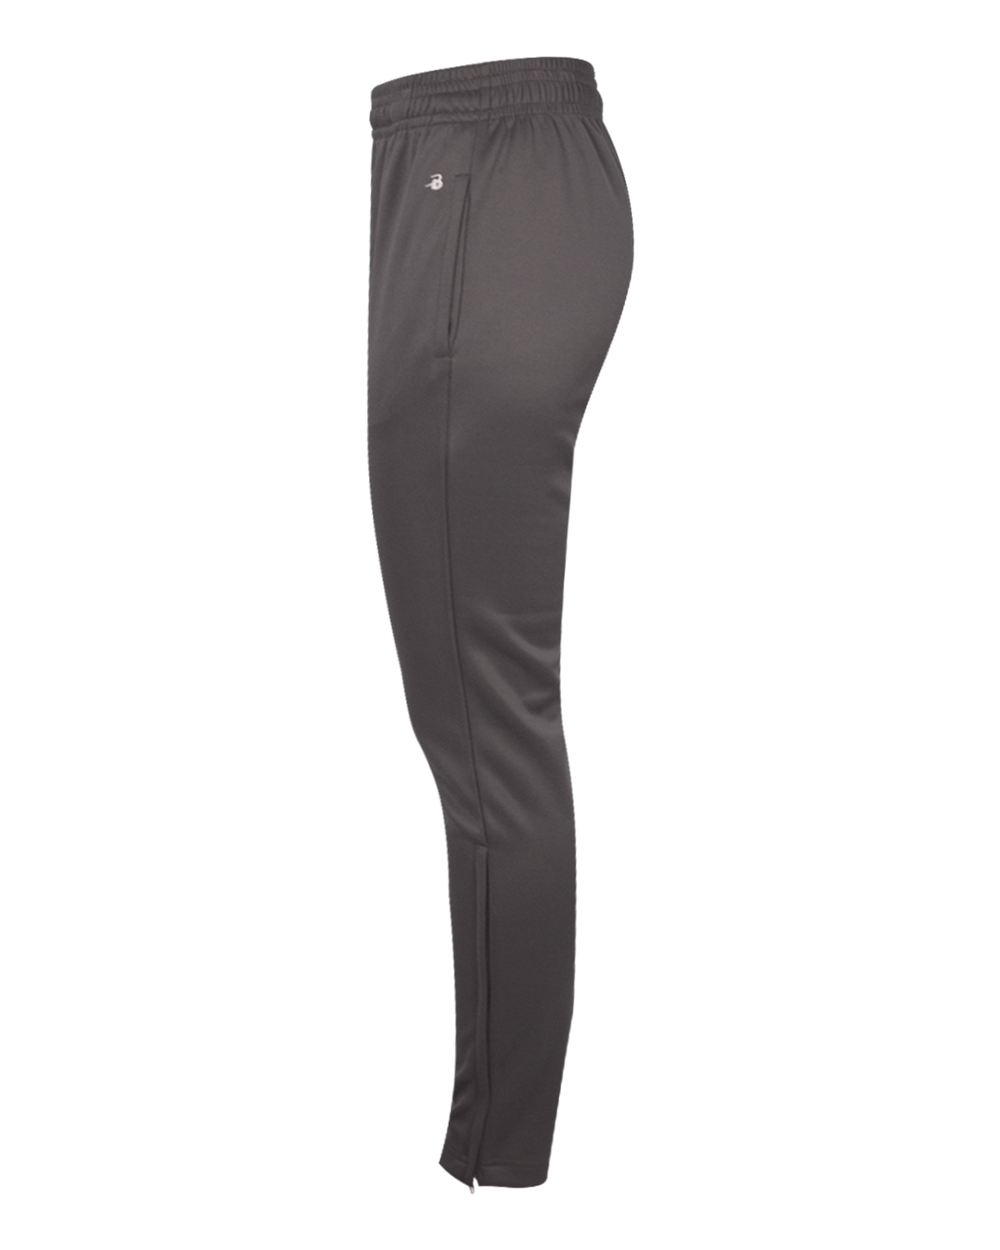 Trainer Women's Pant - Pro Game Sports